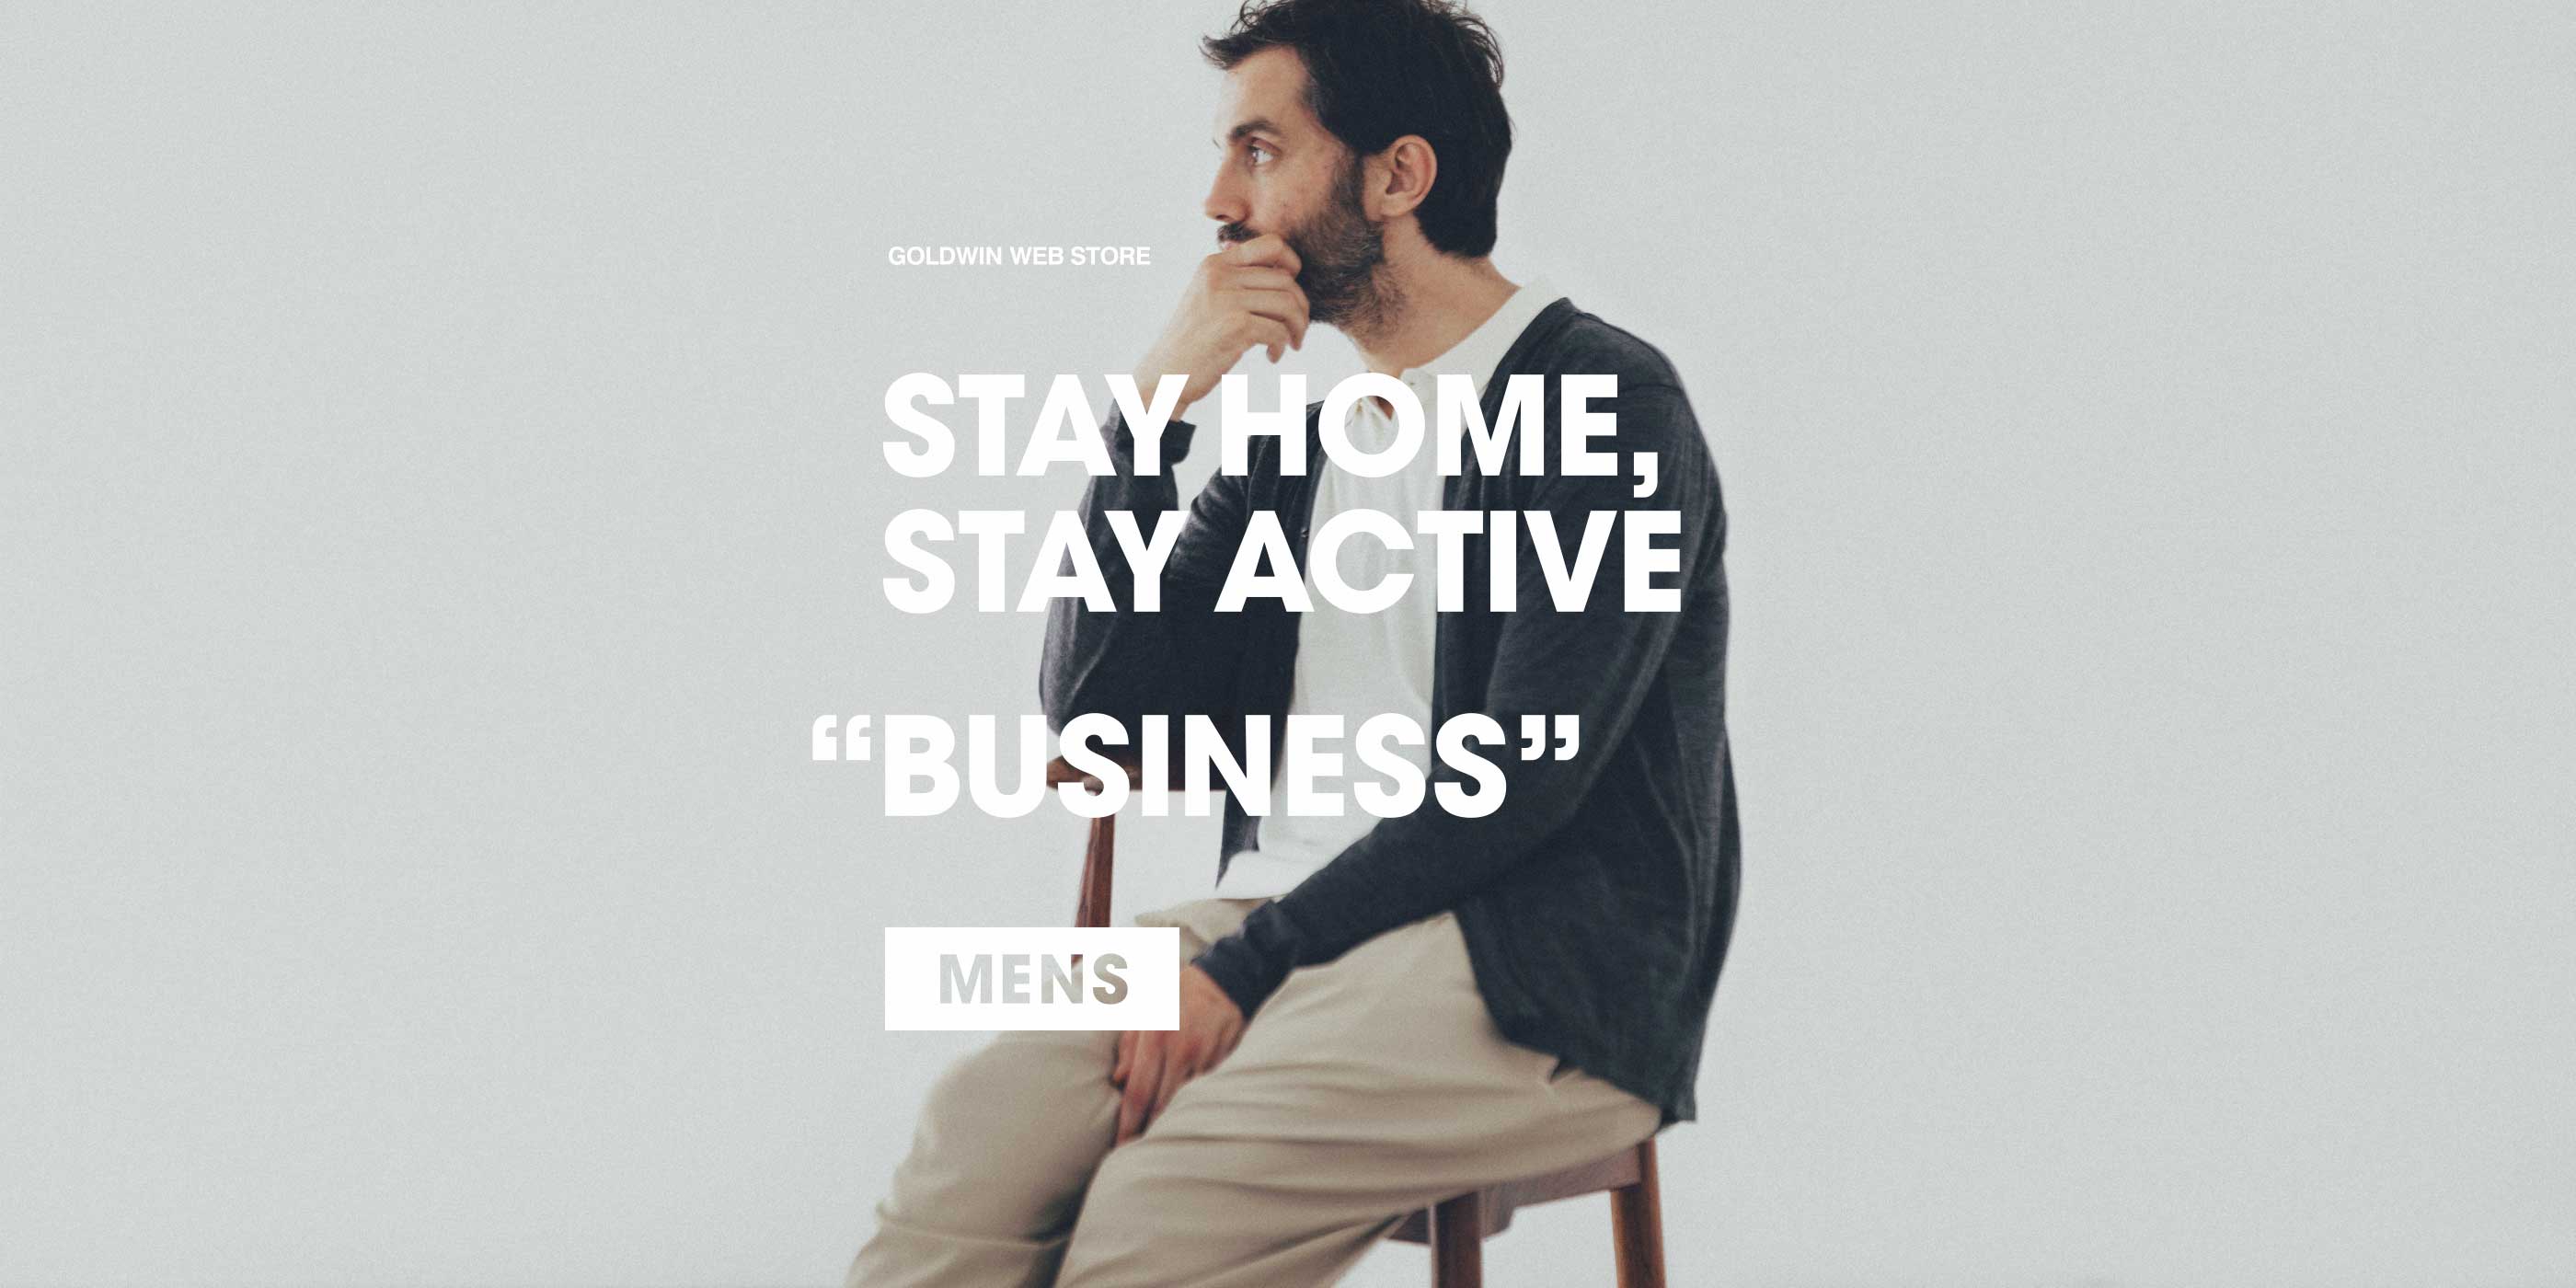 STAY HOME, STAY ACTIVE - BUSINESS - for MEN